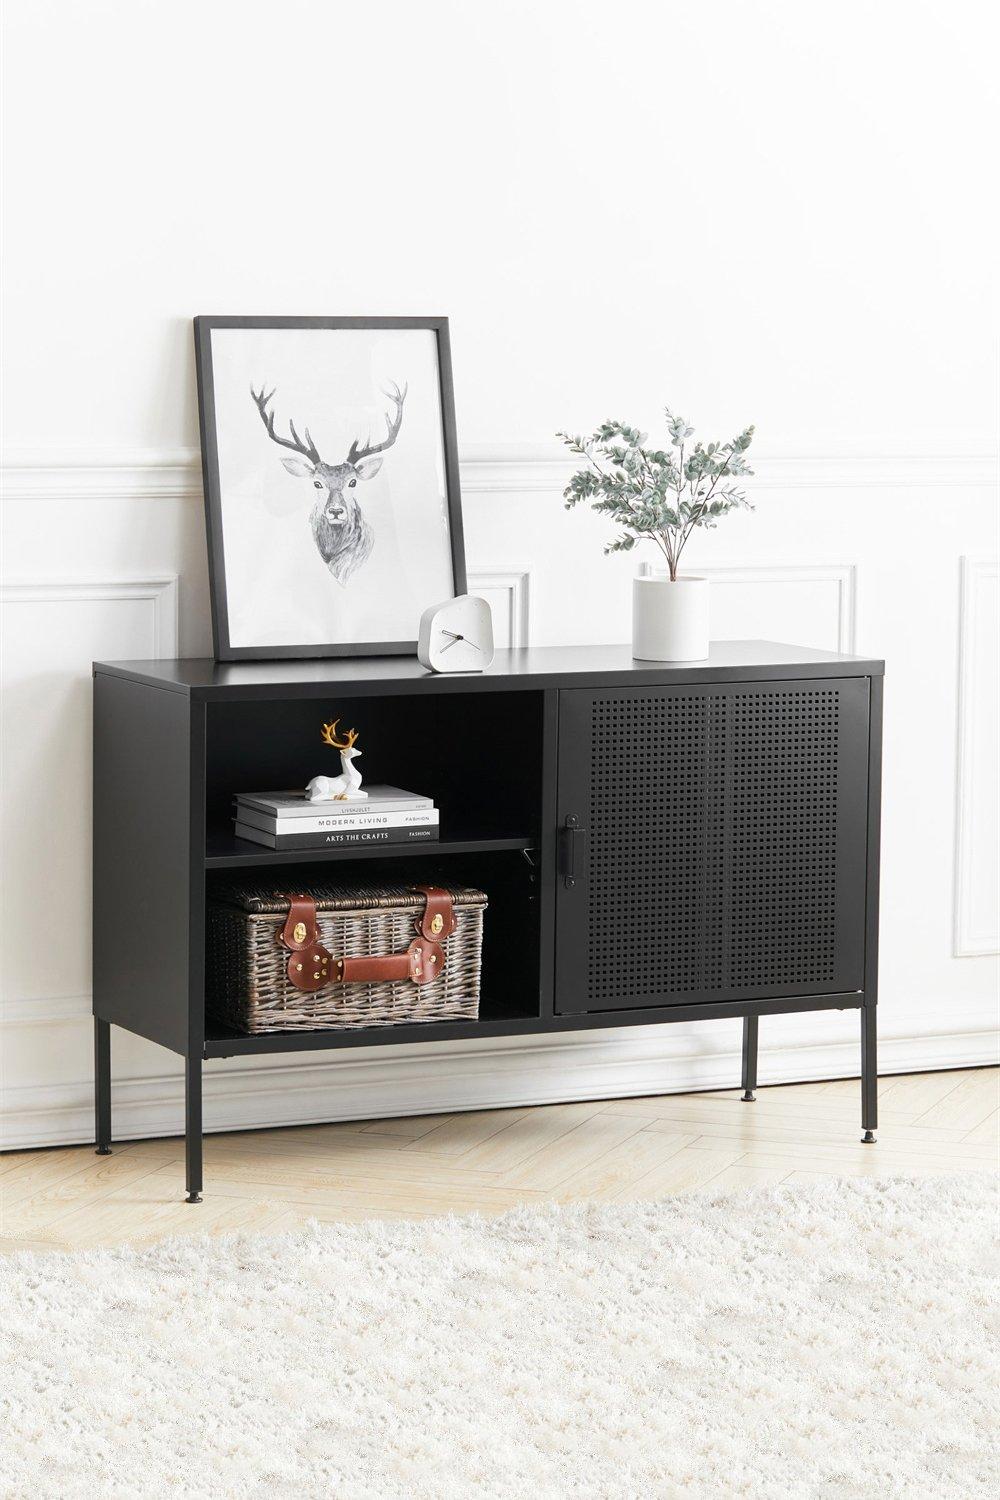 Freestanding Steel File Filing Cabinet with Open Shelves Industrial Style TV Stand Storage Cabinet